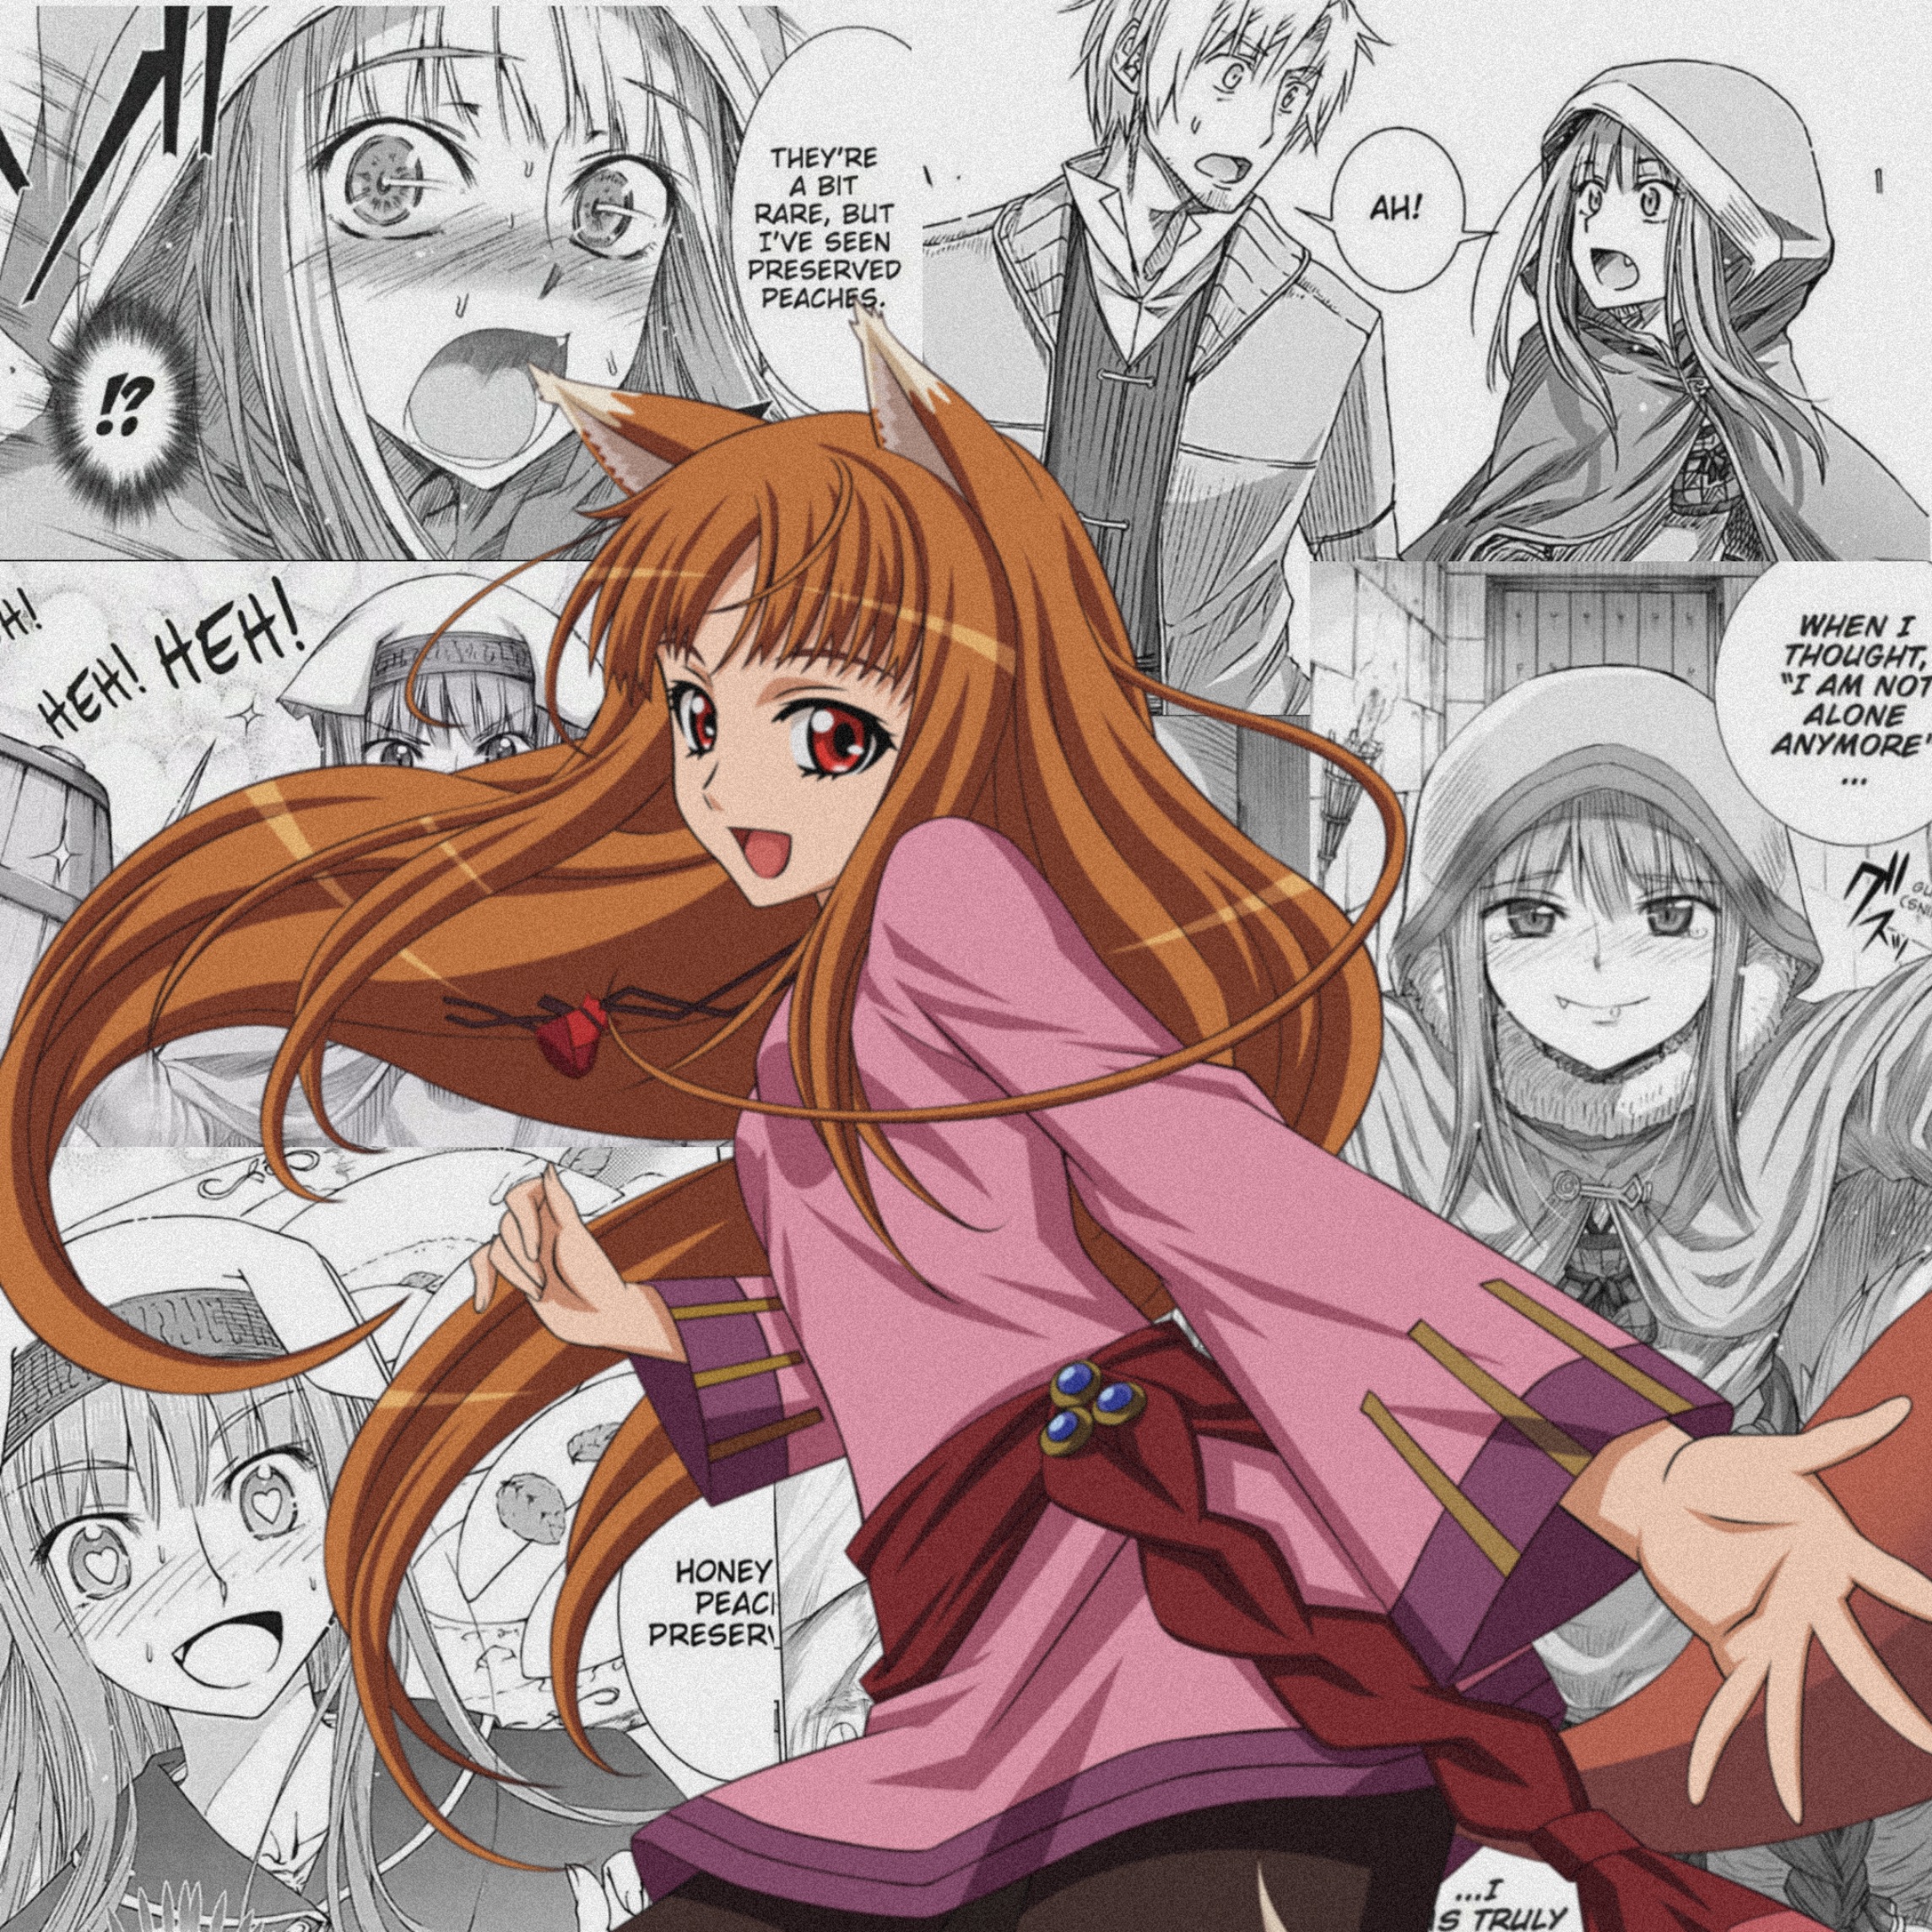 Anime 2289x2289 Spice and Wolf long hair anime girls Holo (Spice and Wolf) wolf girls smiling Japanese Art manga blushing text looking at viewer necklace red eyes redhead arms reaching wolf ears heart eyes